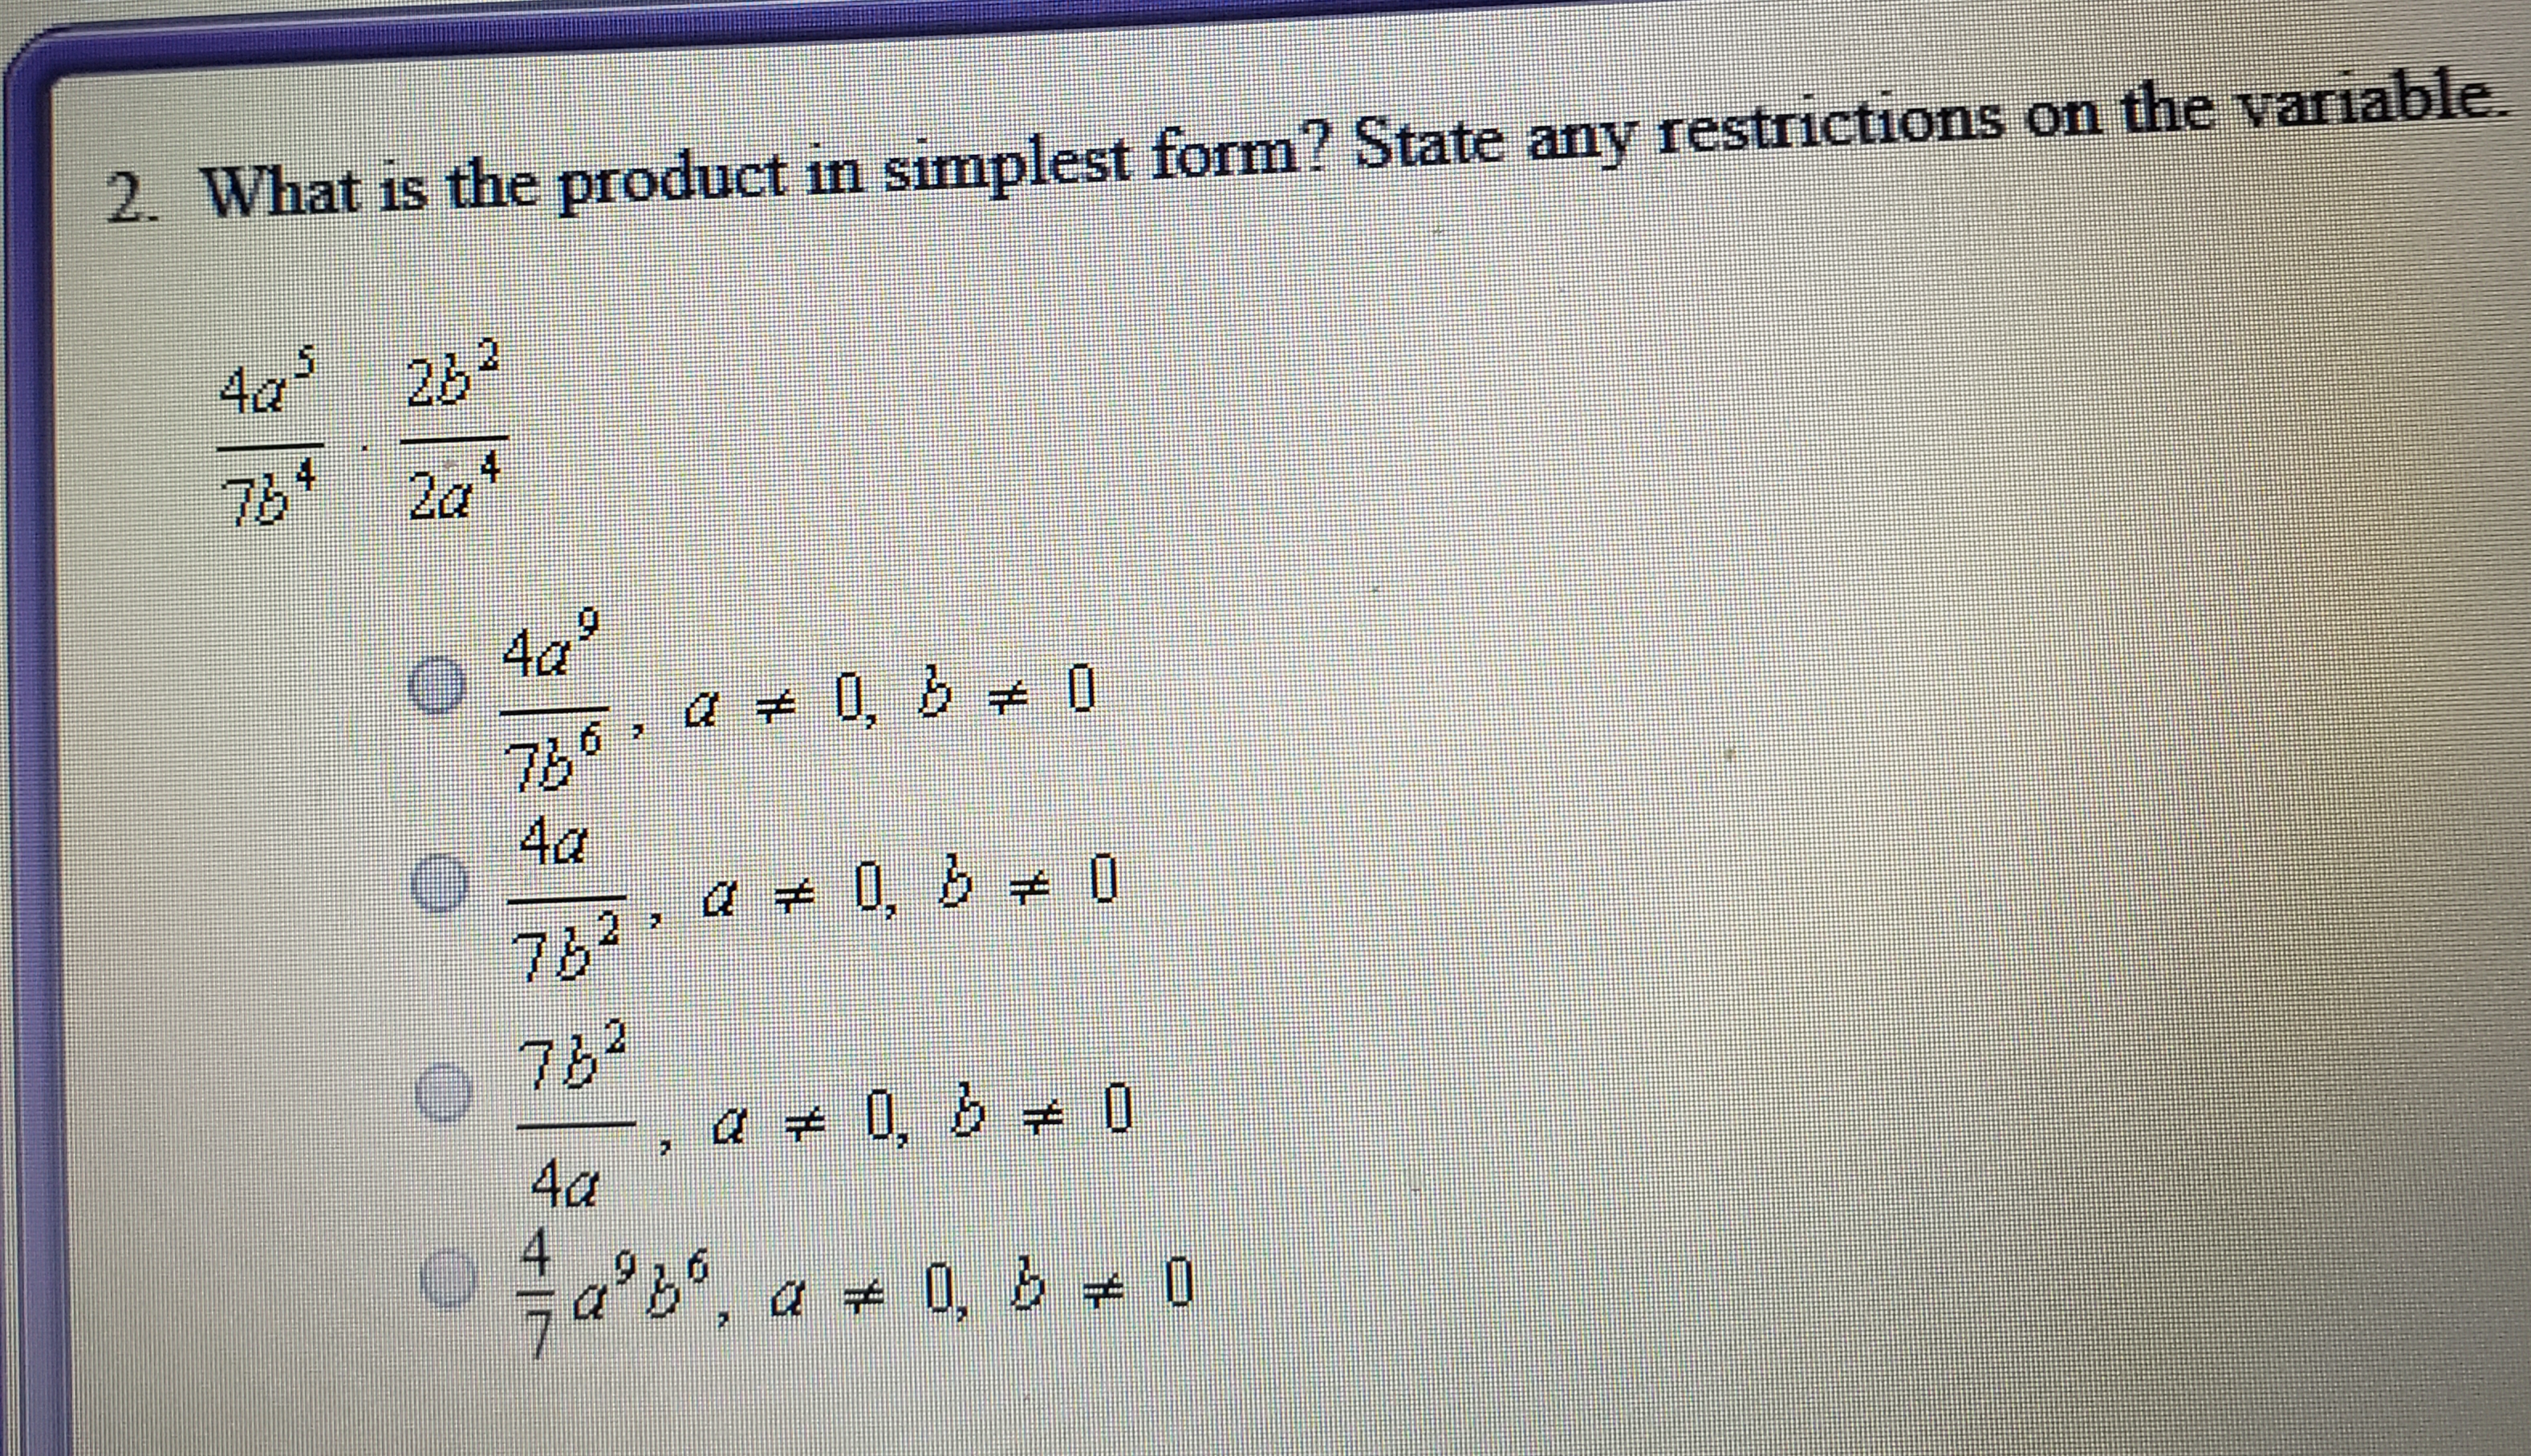 What is the product in simplest form? State any restrictions on the variable.
4a 26?
76
2a
